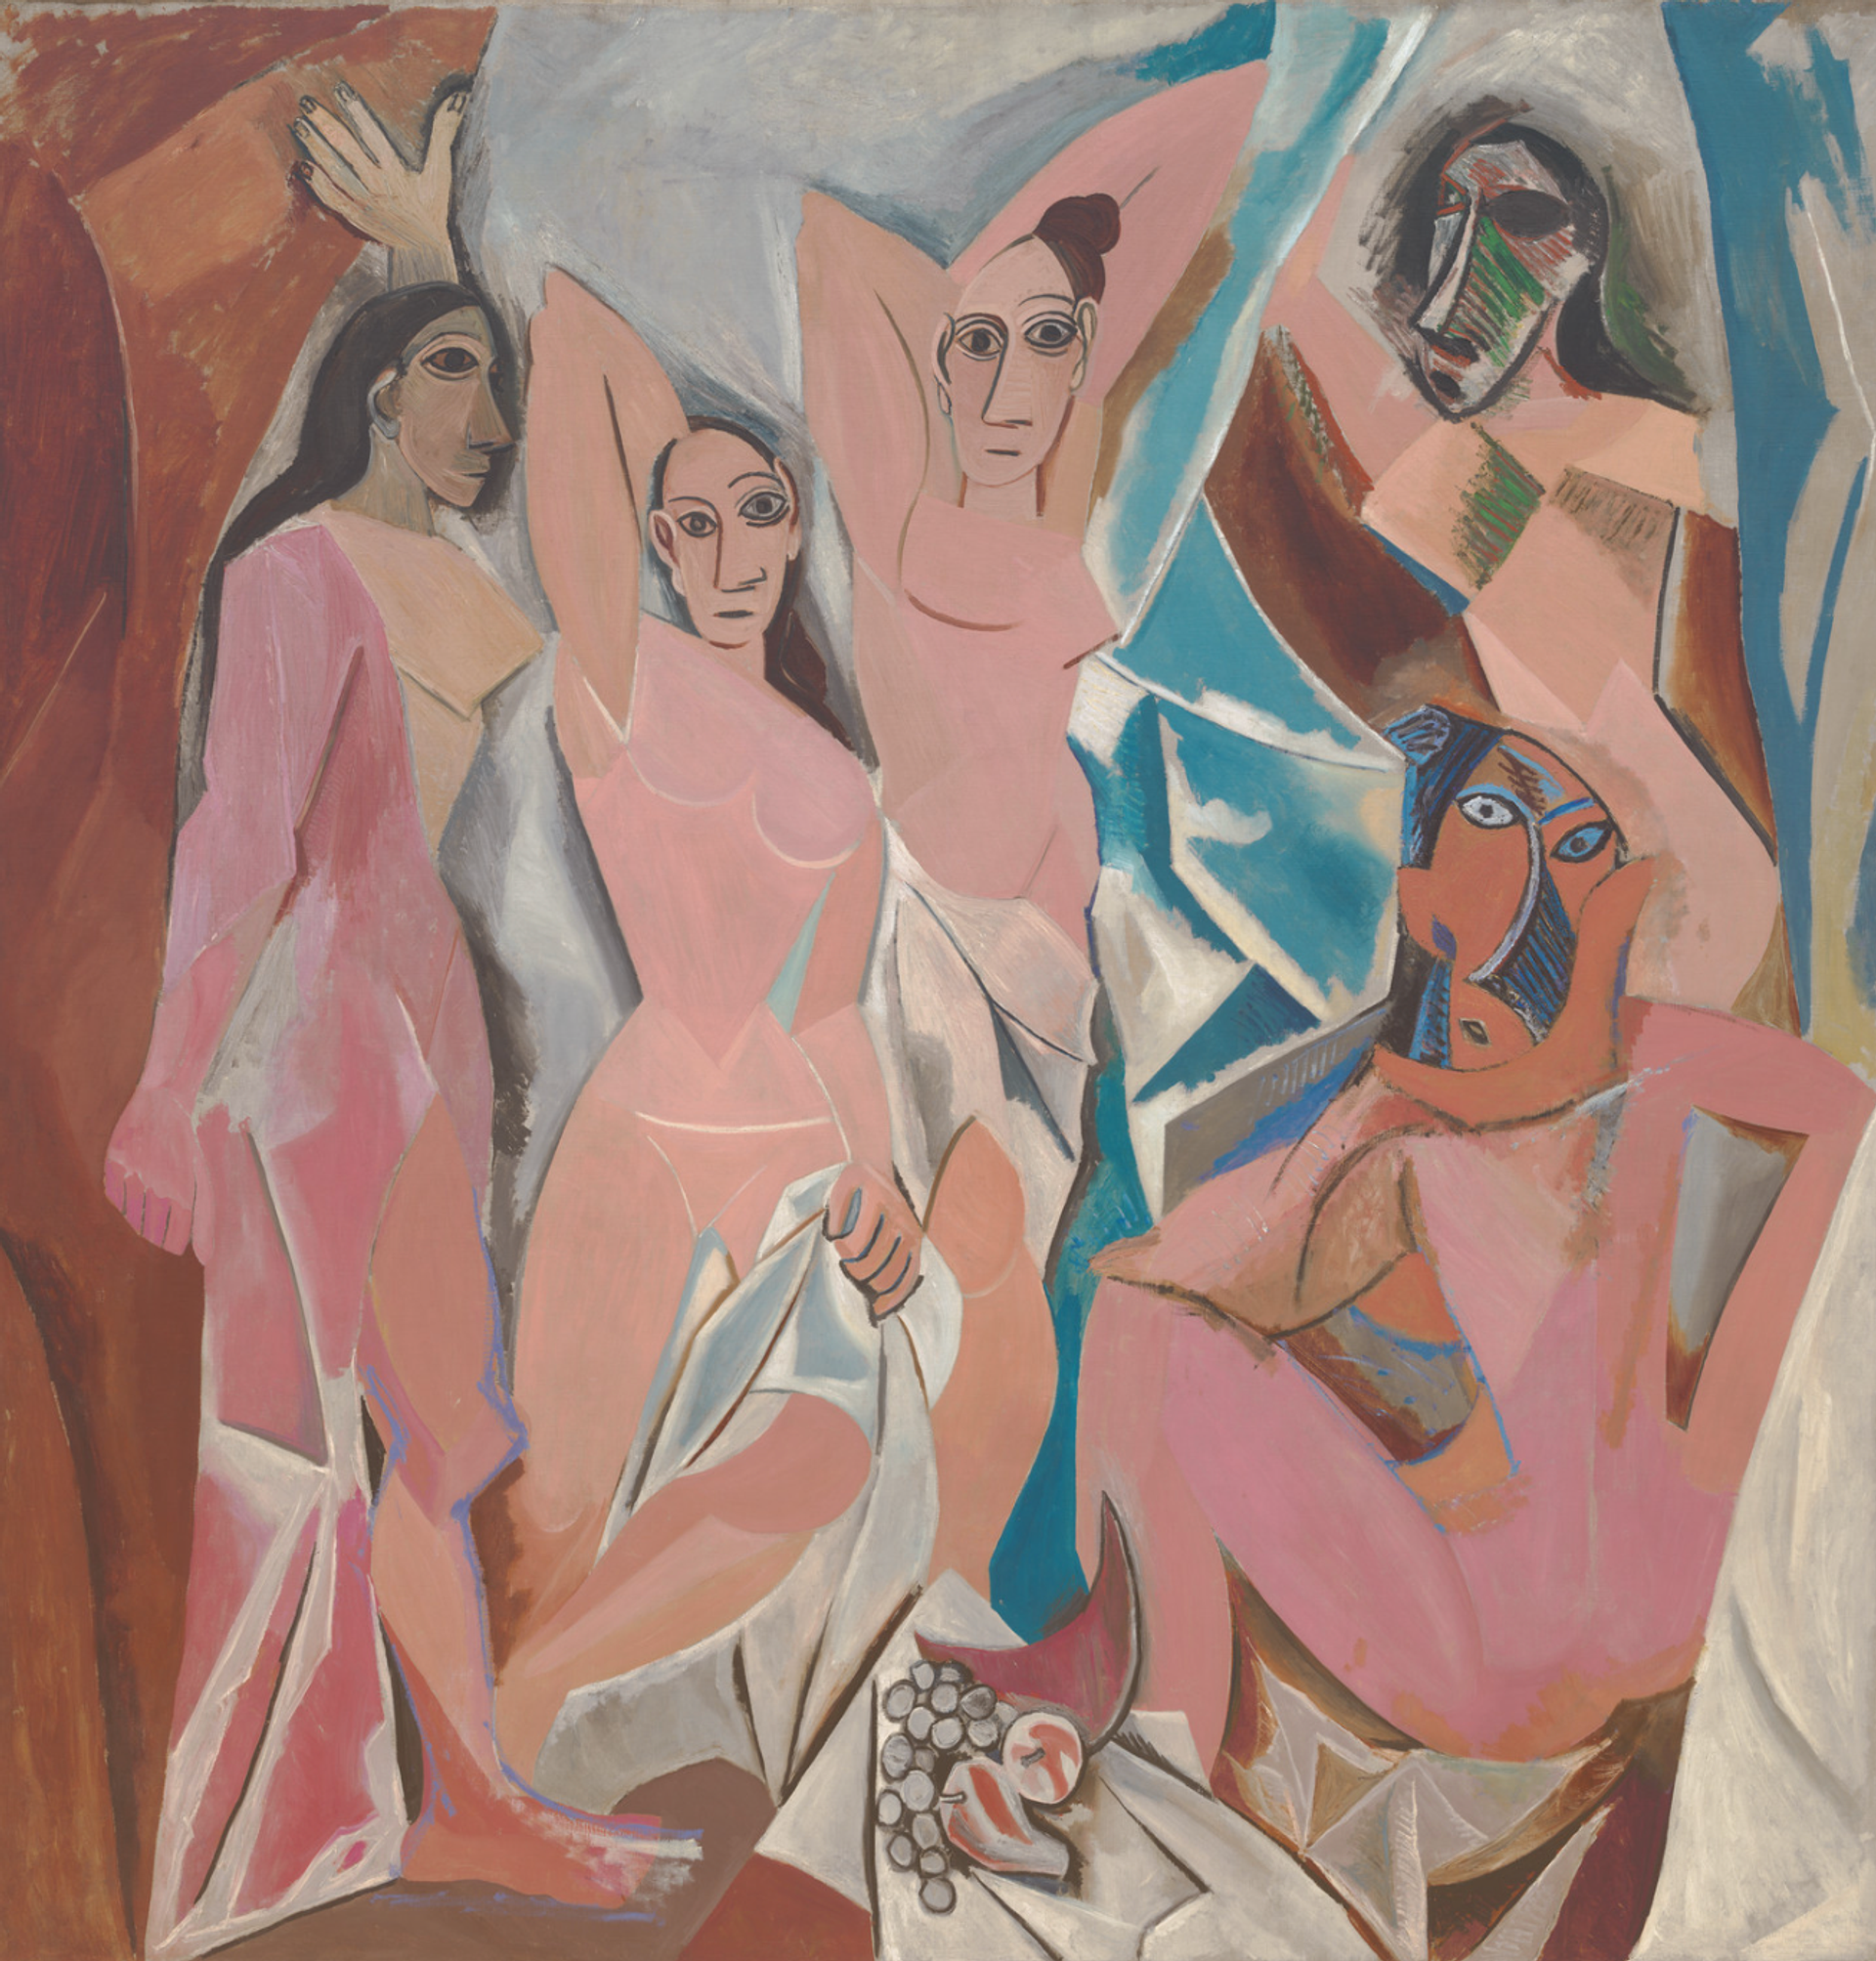 Painting by Pablo Picasso depicting five nude figures with influences from Iberian sculpture and African masks, the painting challenges conventional spatial constructions, using fragmented planes to create a dynamic, unsettling effect.